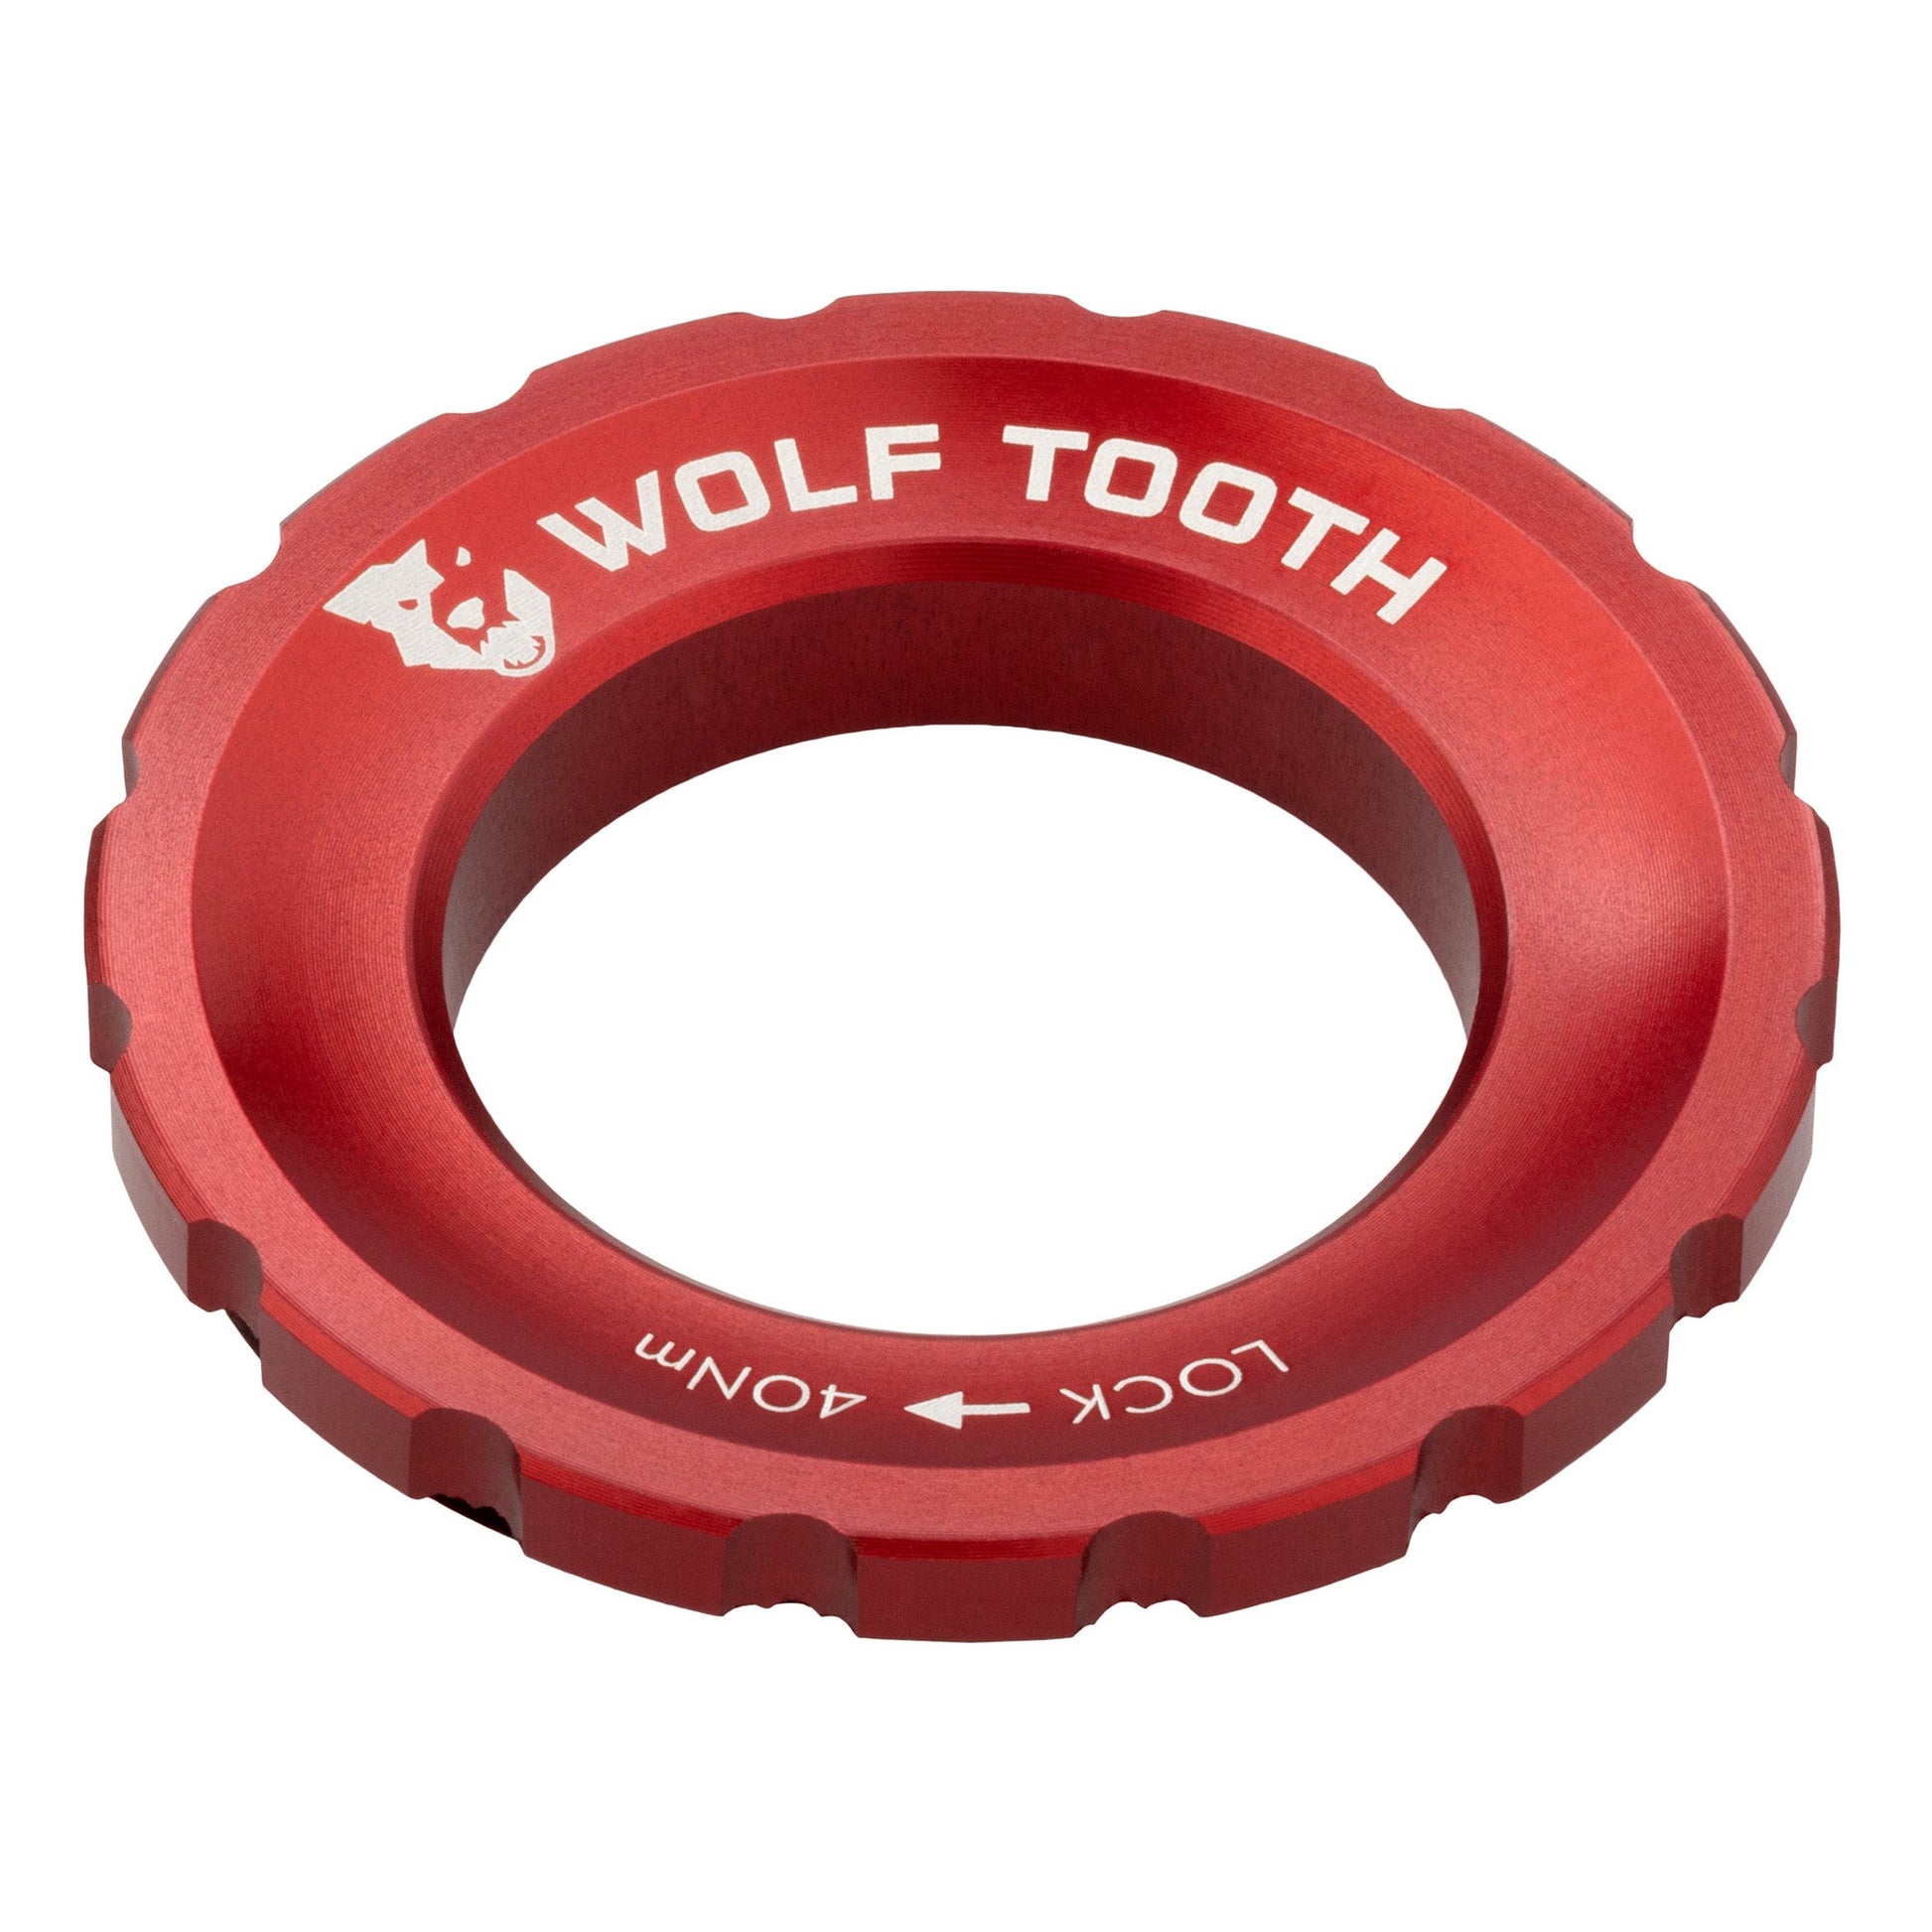 Wolf Tooth Components Centerlock Rotor Lockring - Red Red Serrated Interface 